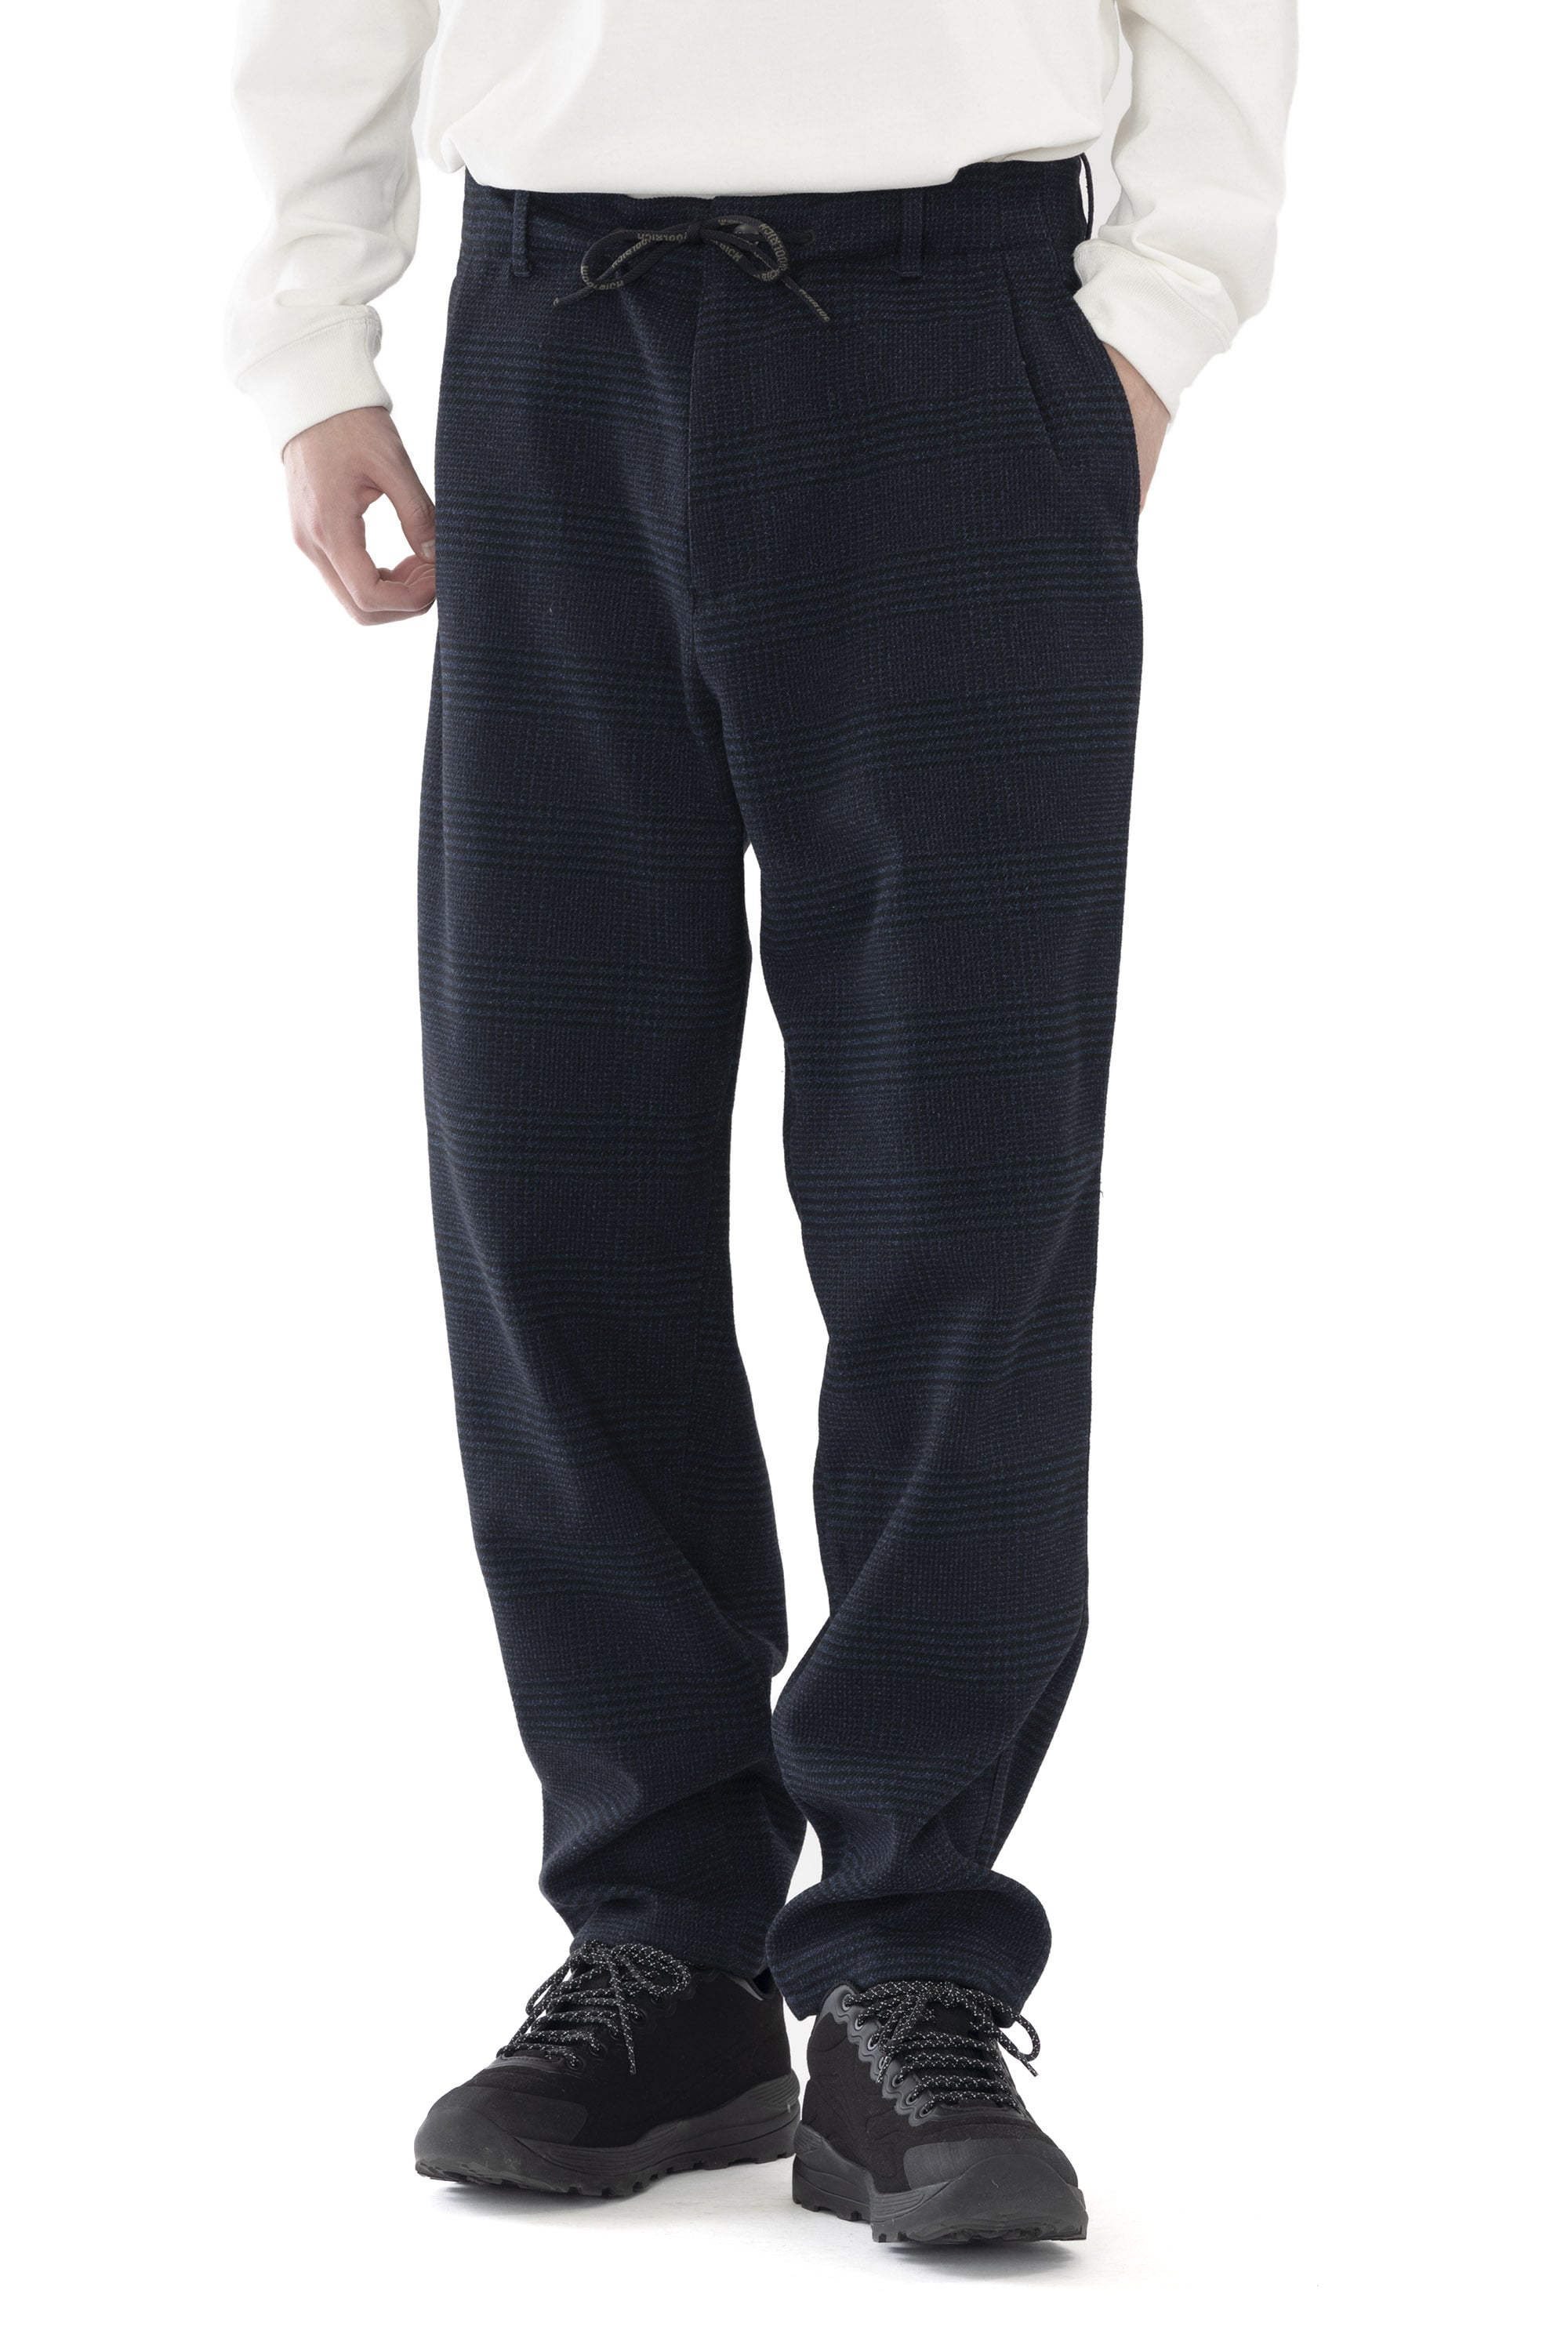 WARM RELAX PANTS 2.0